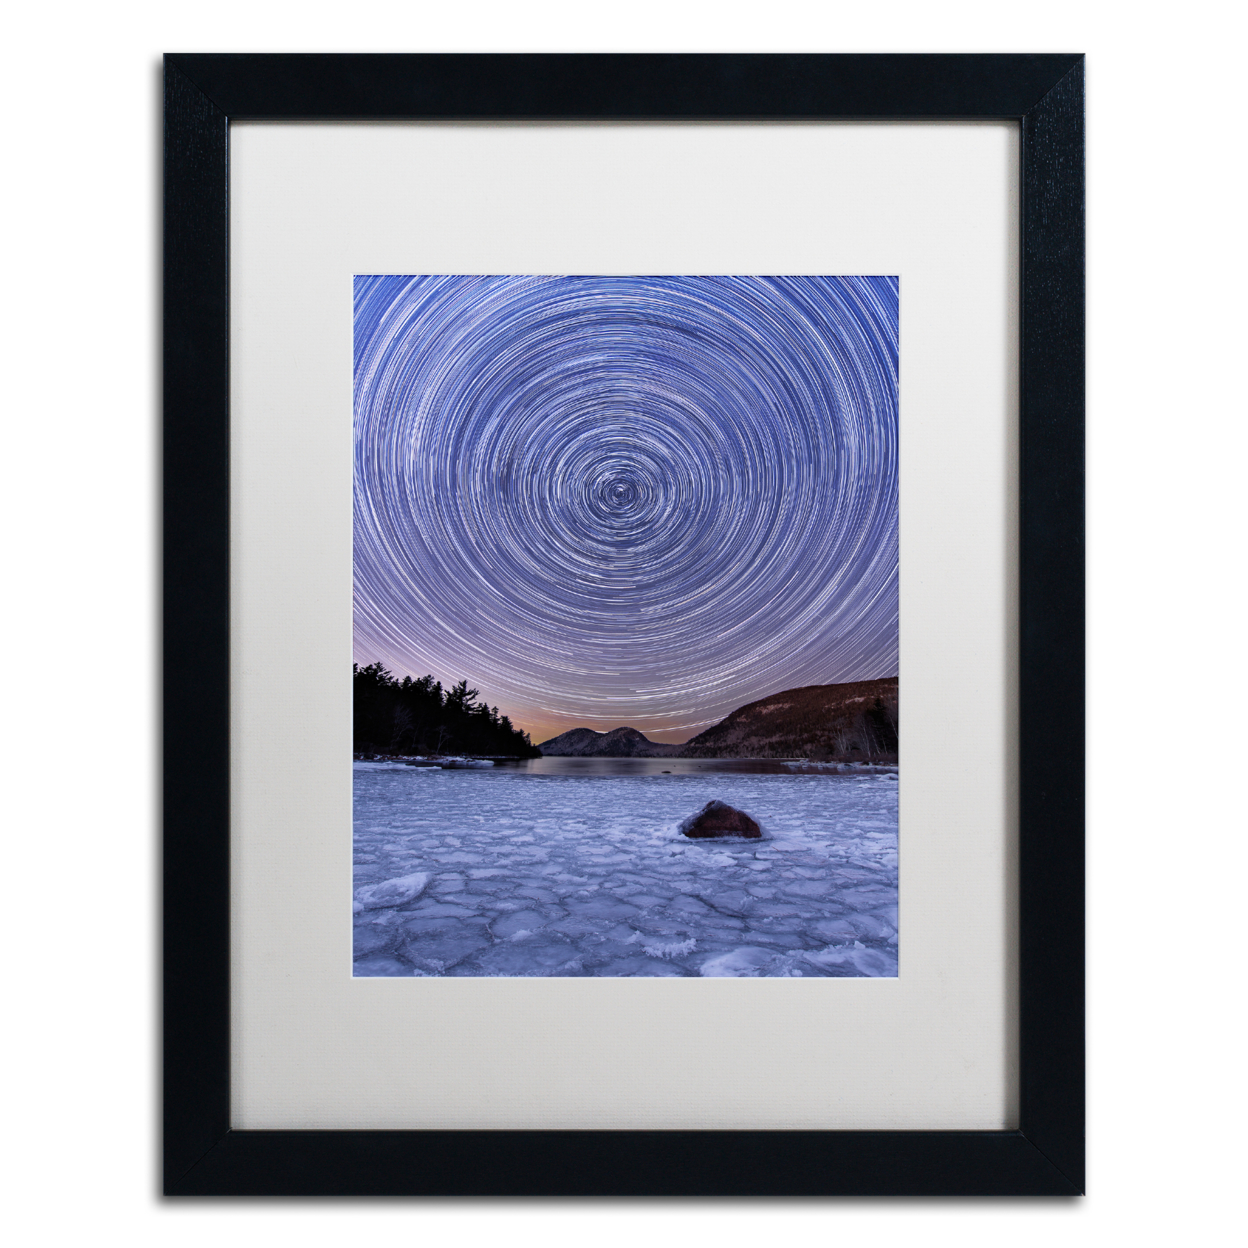 Michael Blanchette Photography 'Circles & Bubbles' Black Wooden Framed Art 18 X 22 Inches